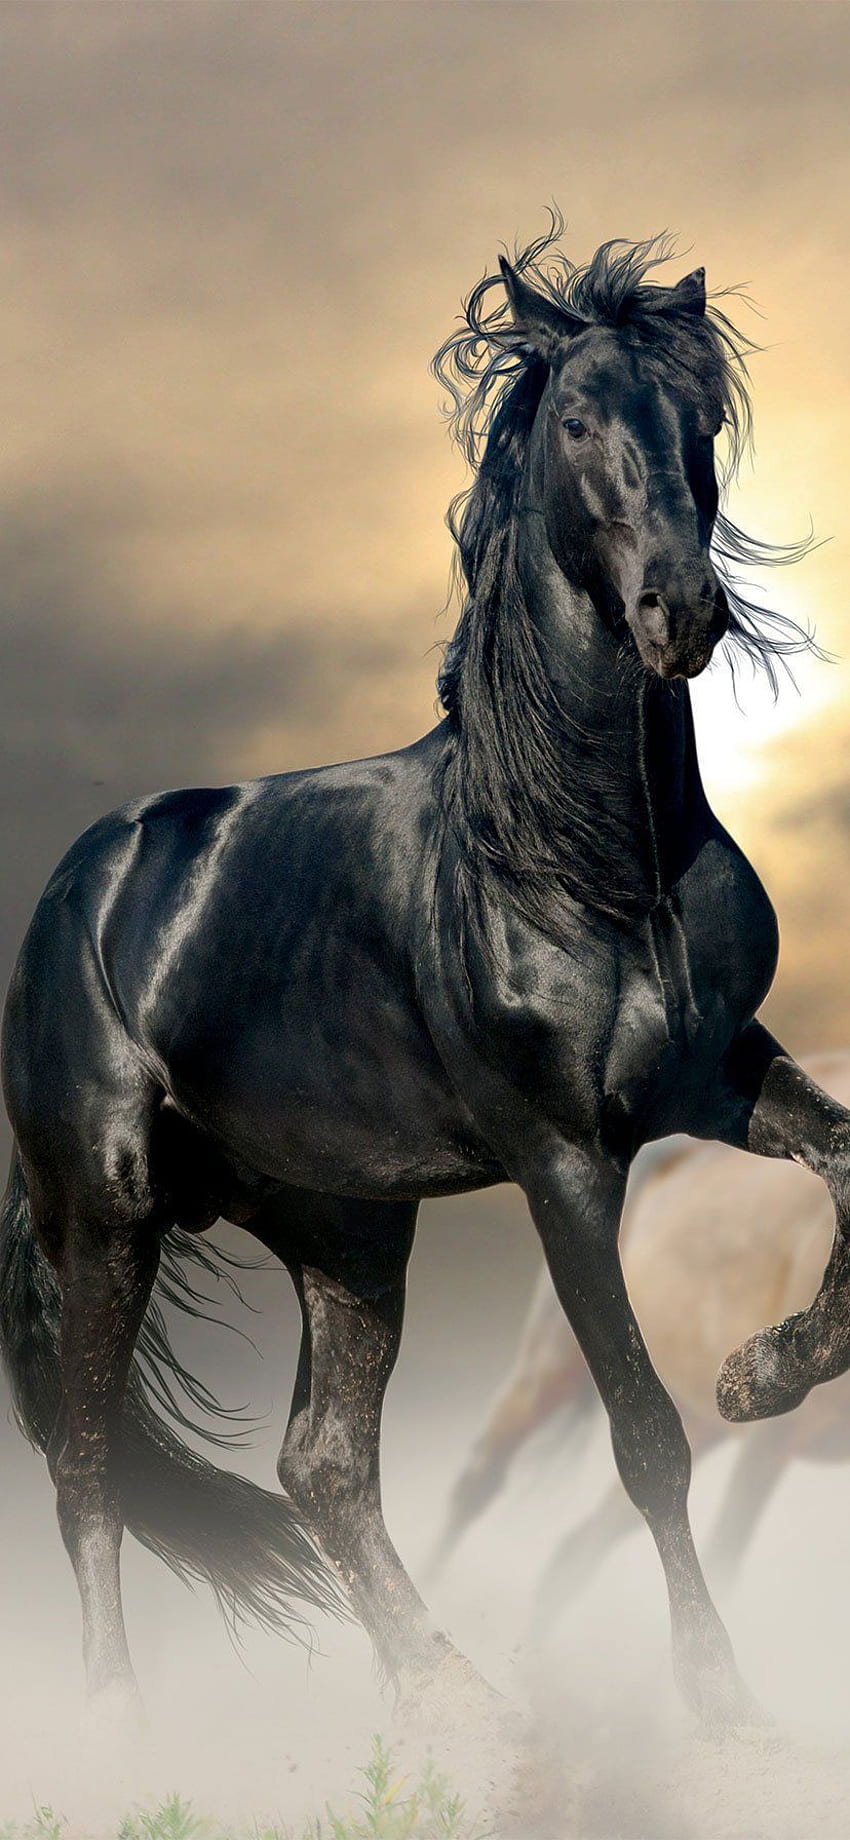 400+ of the Best HD Horse Wallpapers for Free - Pixabay